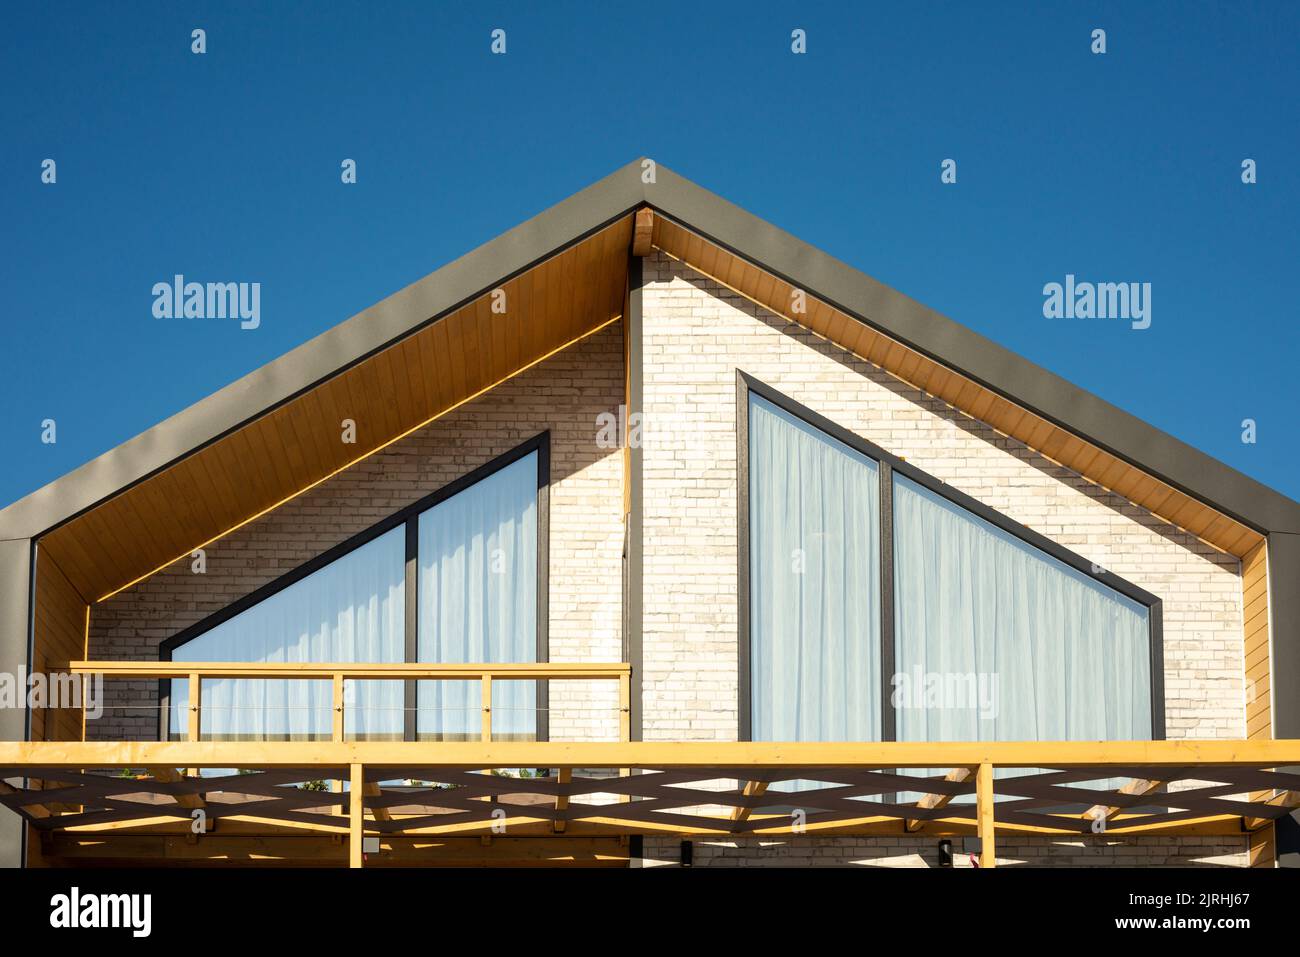 Wooden timber frame prefabricated or prefab house as modular housing and flat pack homes concept. Stock Photo